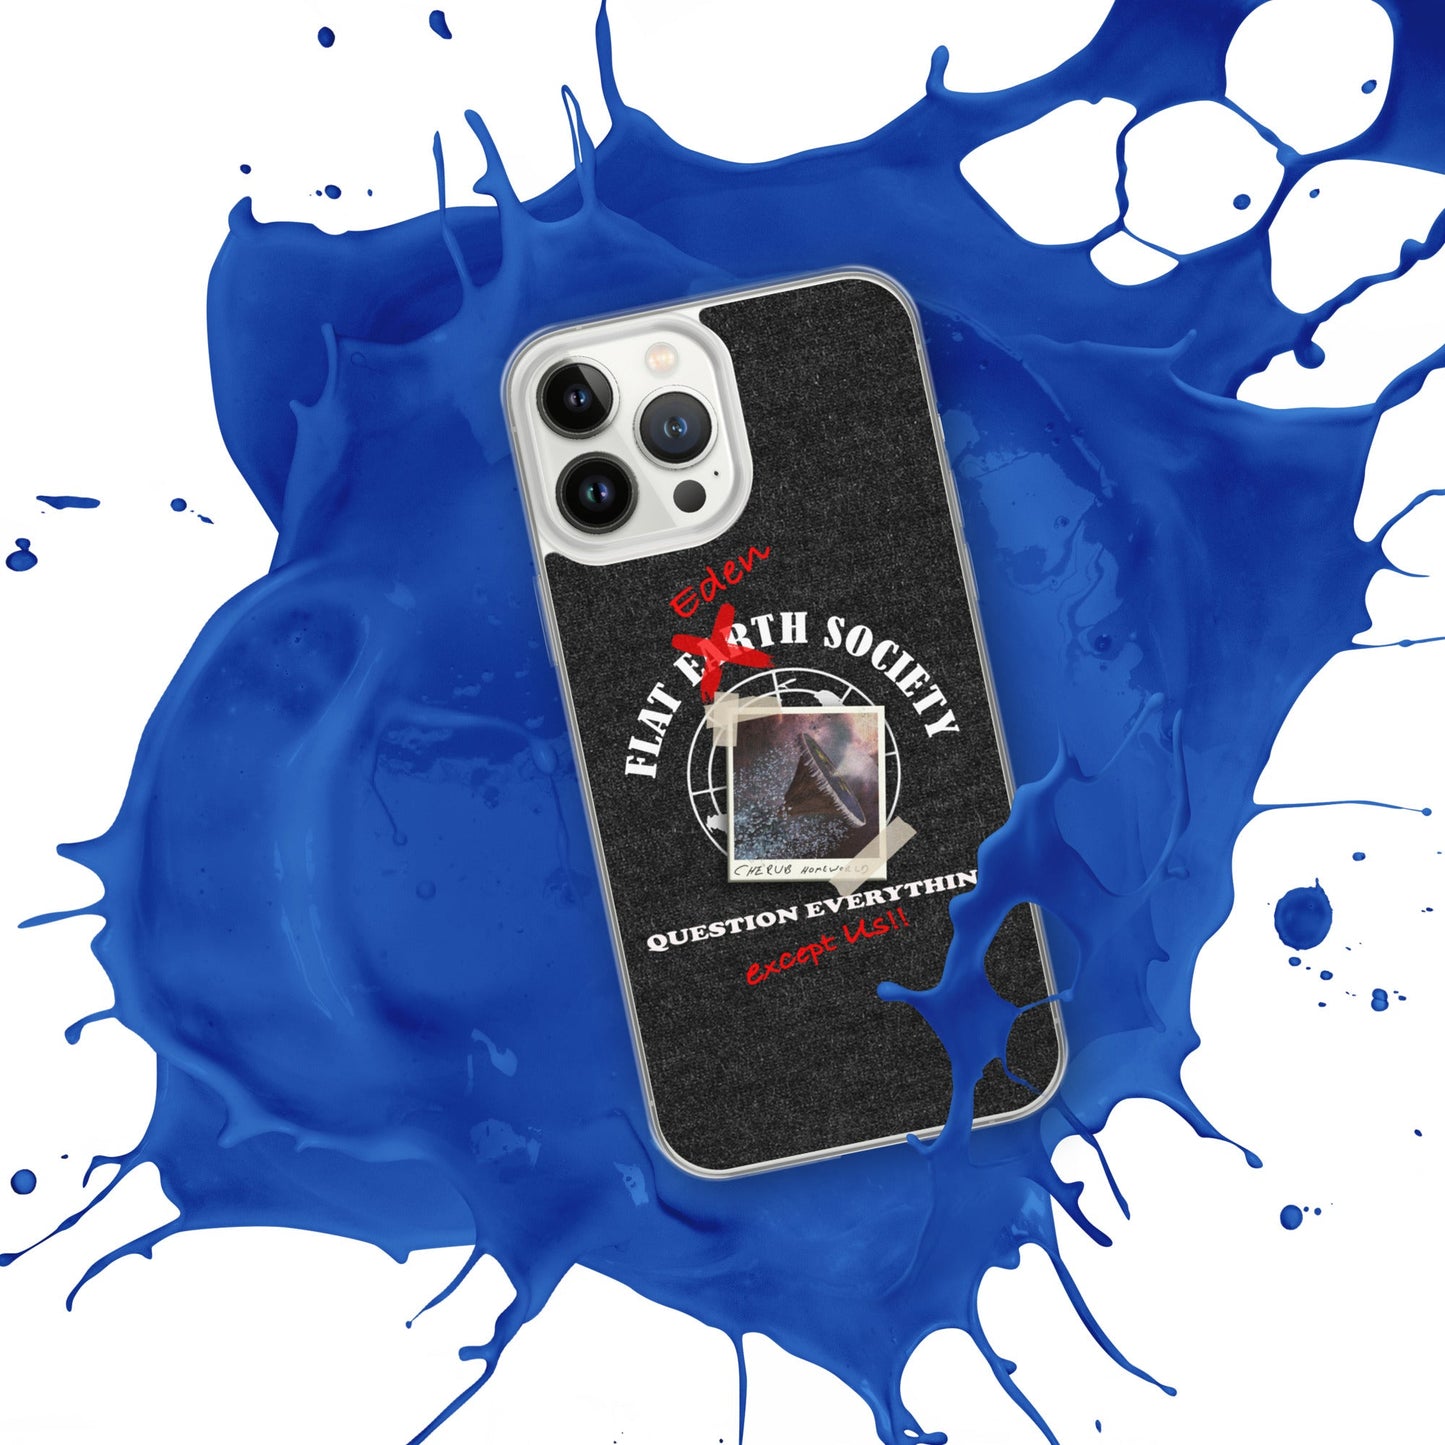 iPhone Case | Intergalactic Space Force 2 | Flat Eden Society - Spectral Ink Shop - Mobile Phone Cases -9780728_13801